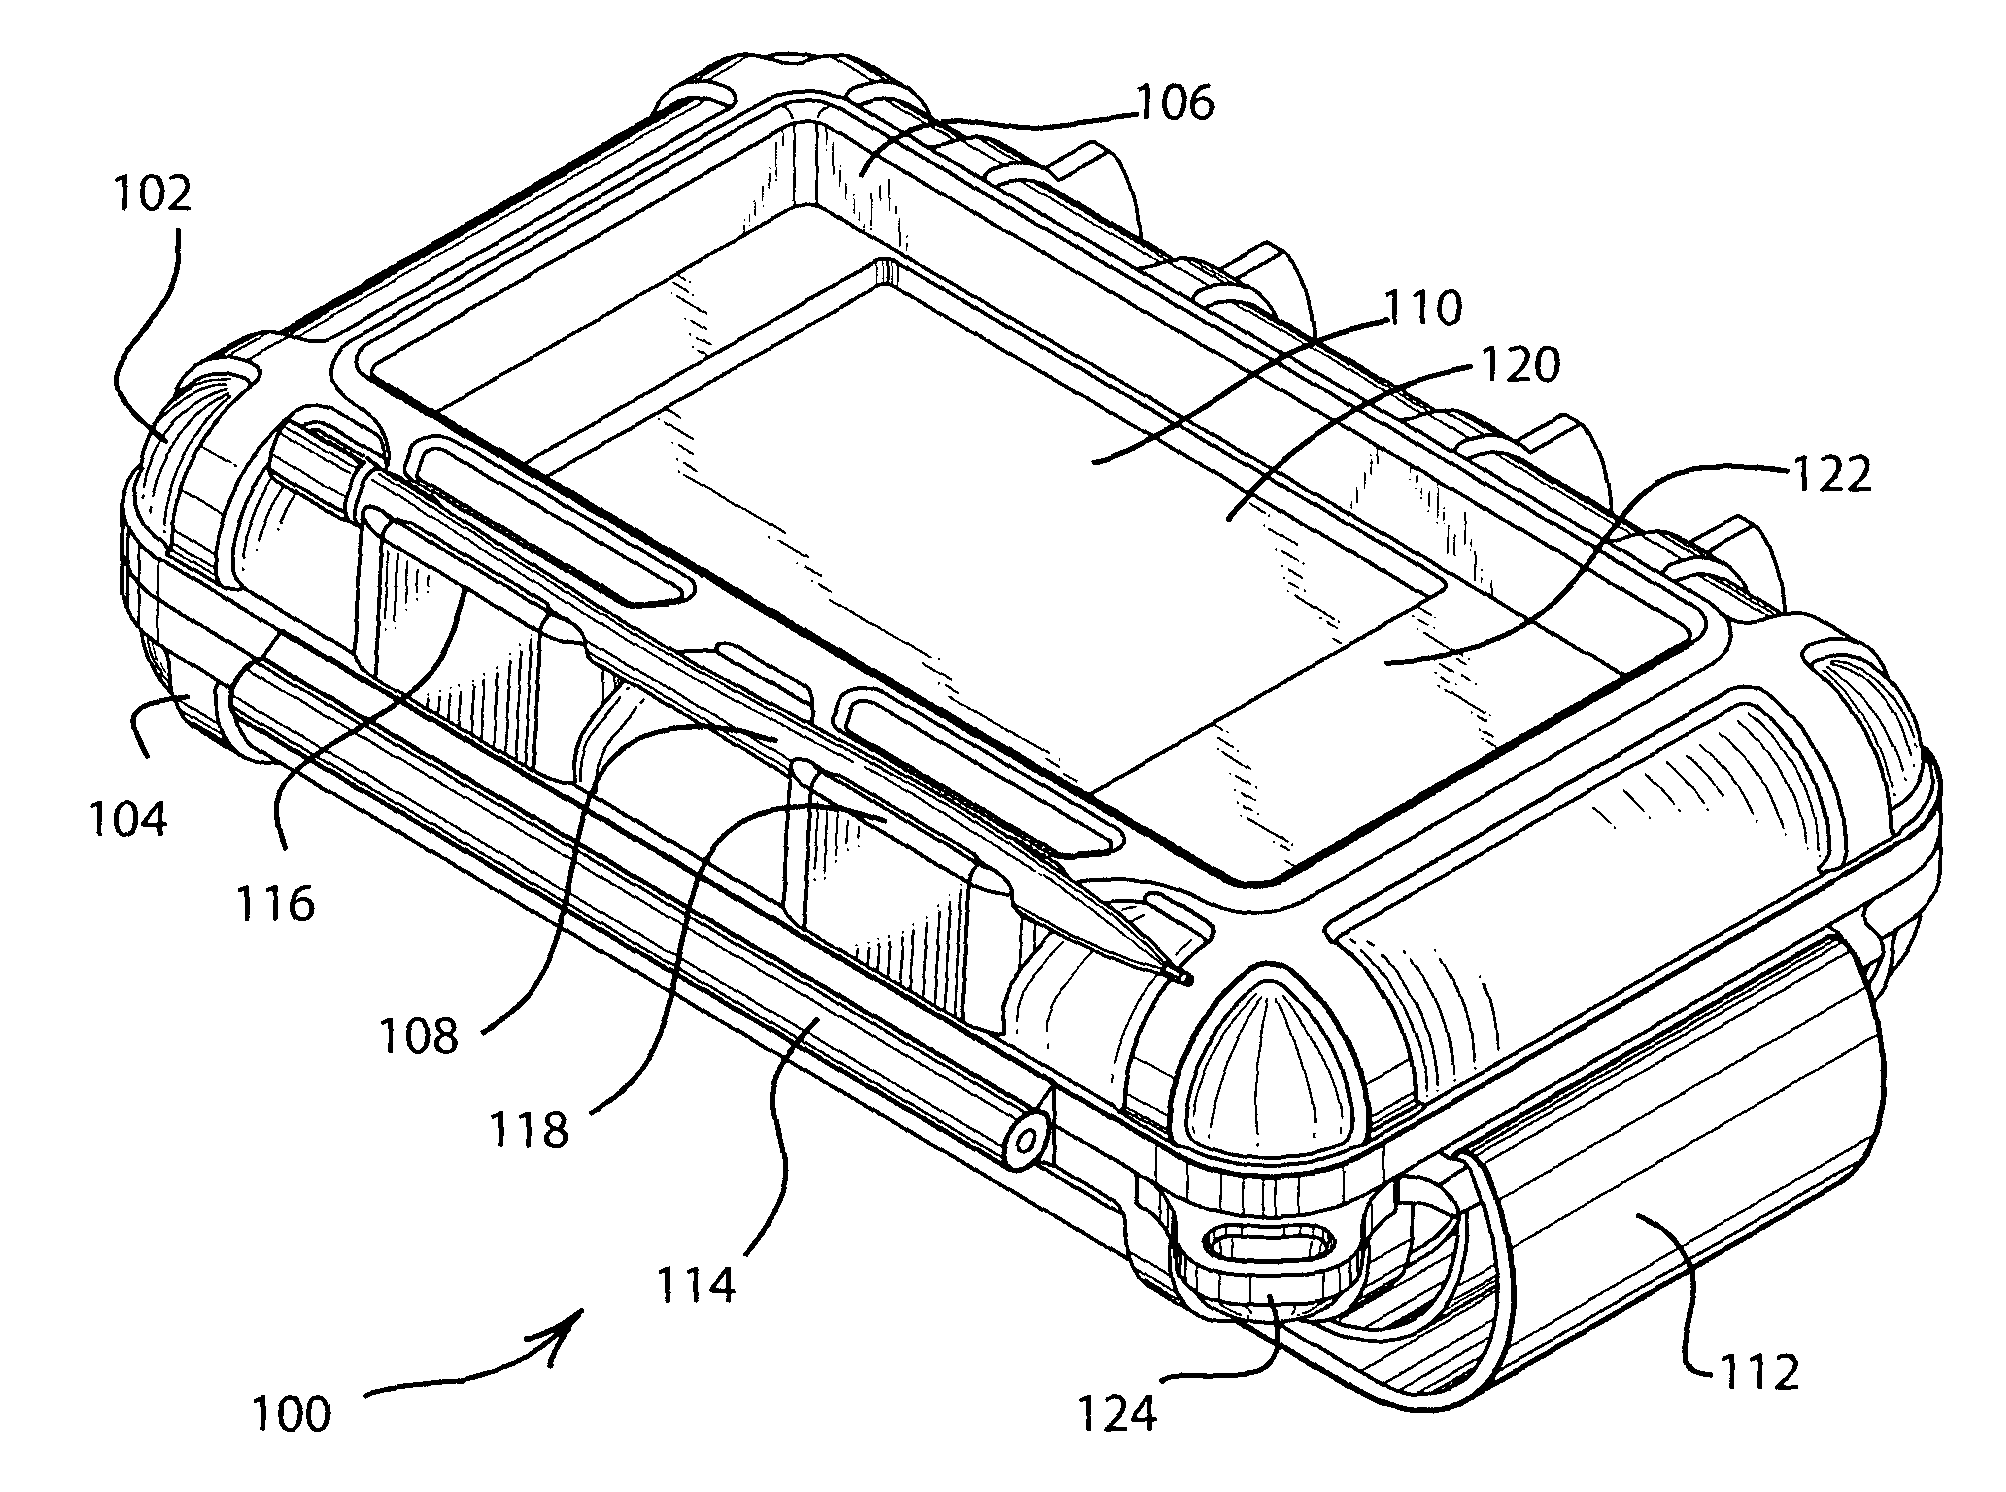 Protective membrane for touch screen device